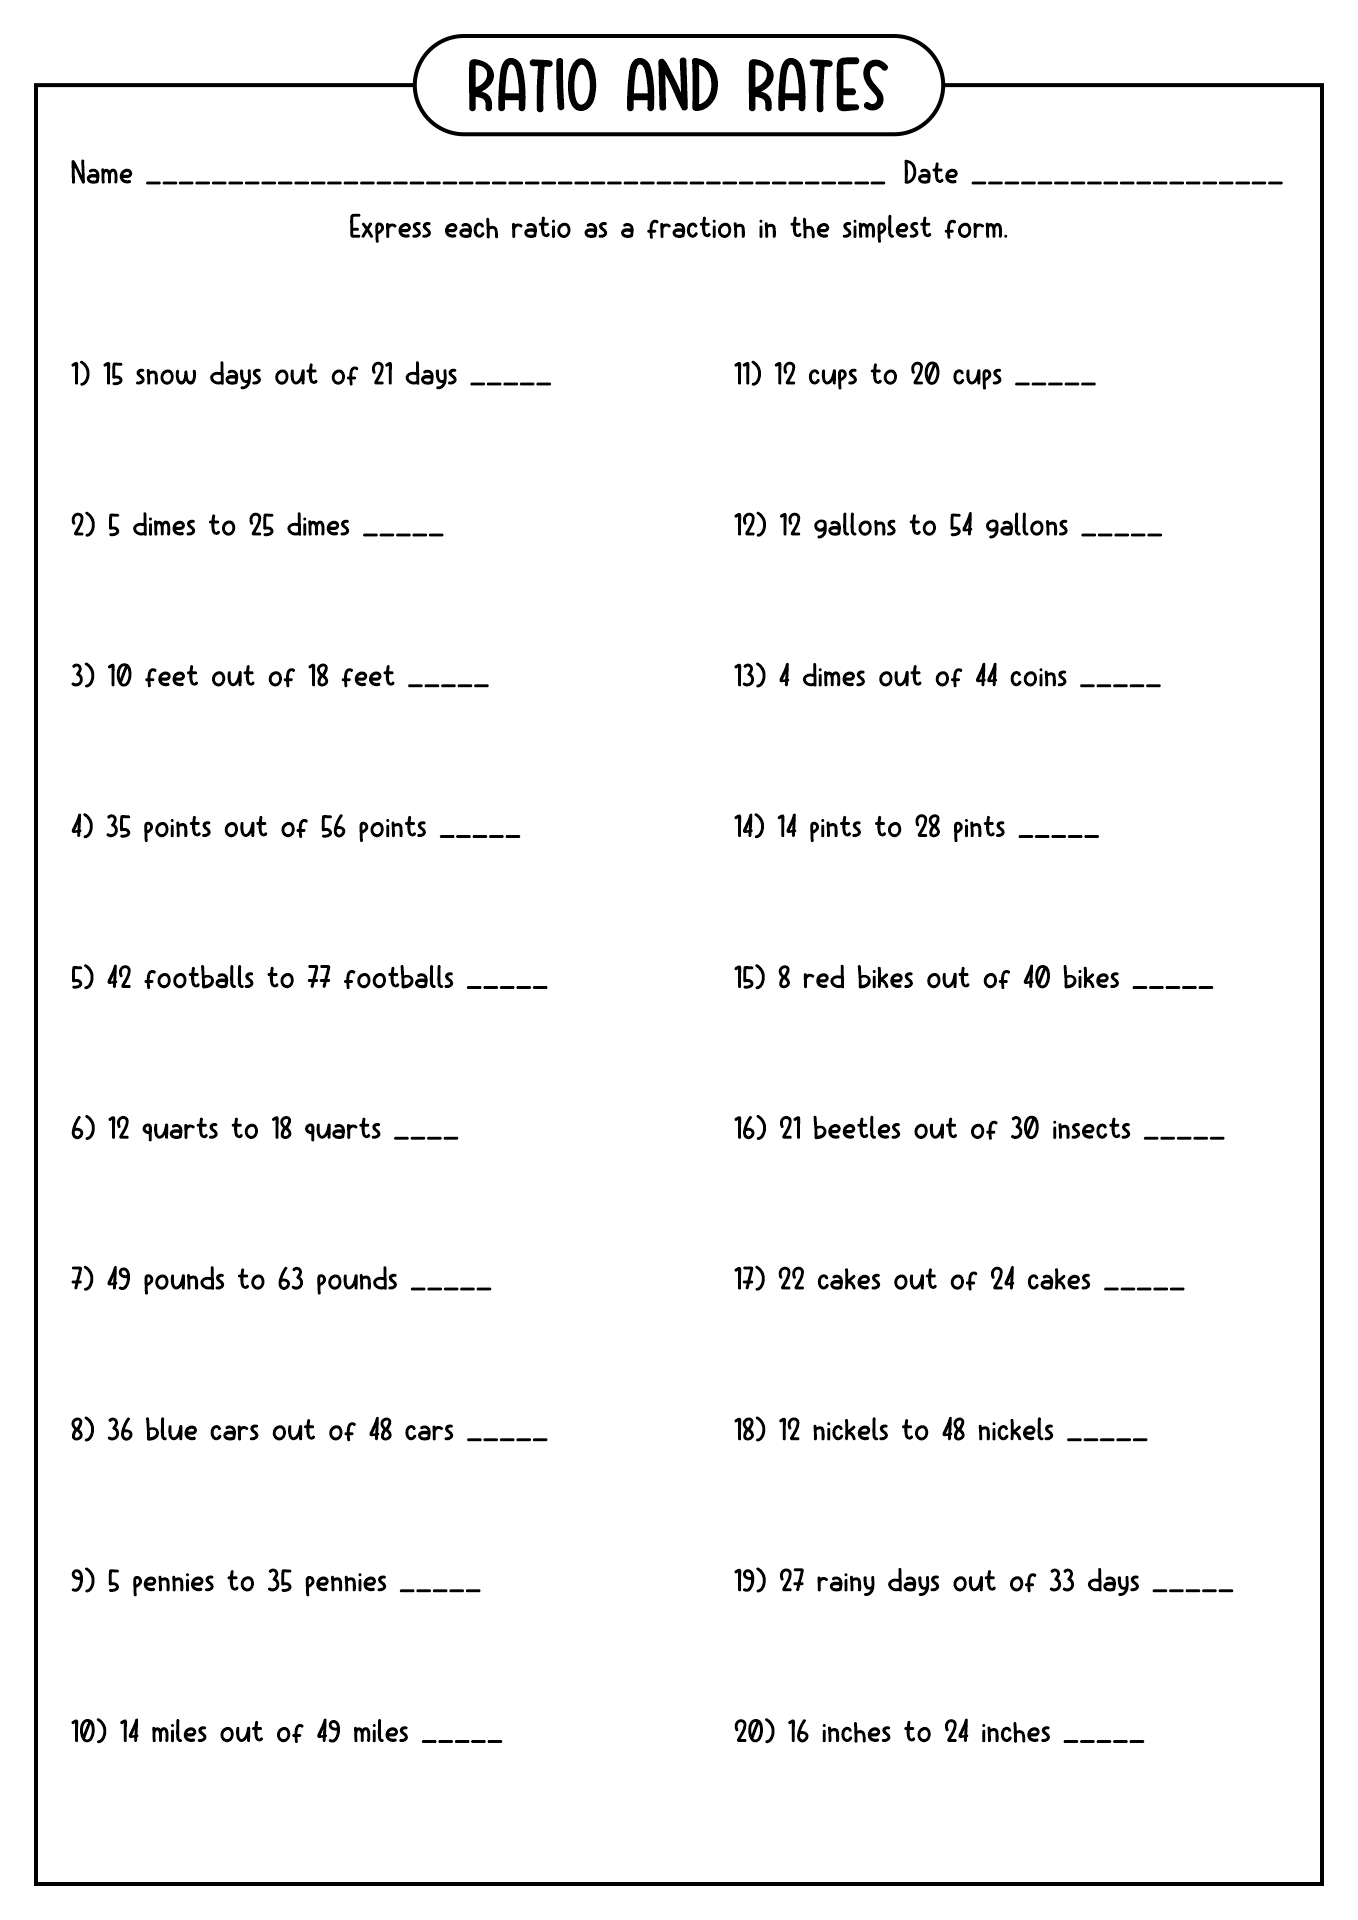 Free Printable Ratio Worksheets For 6th Grade